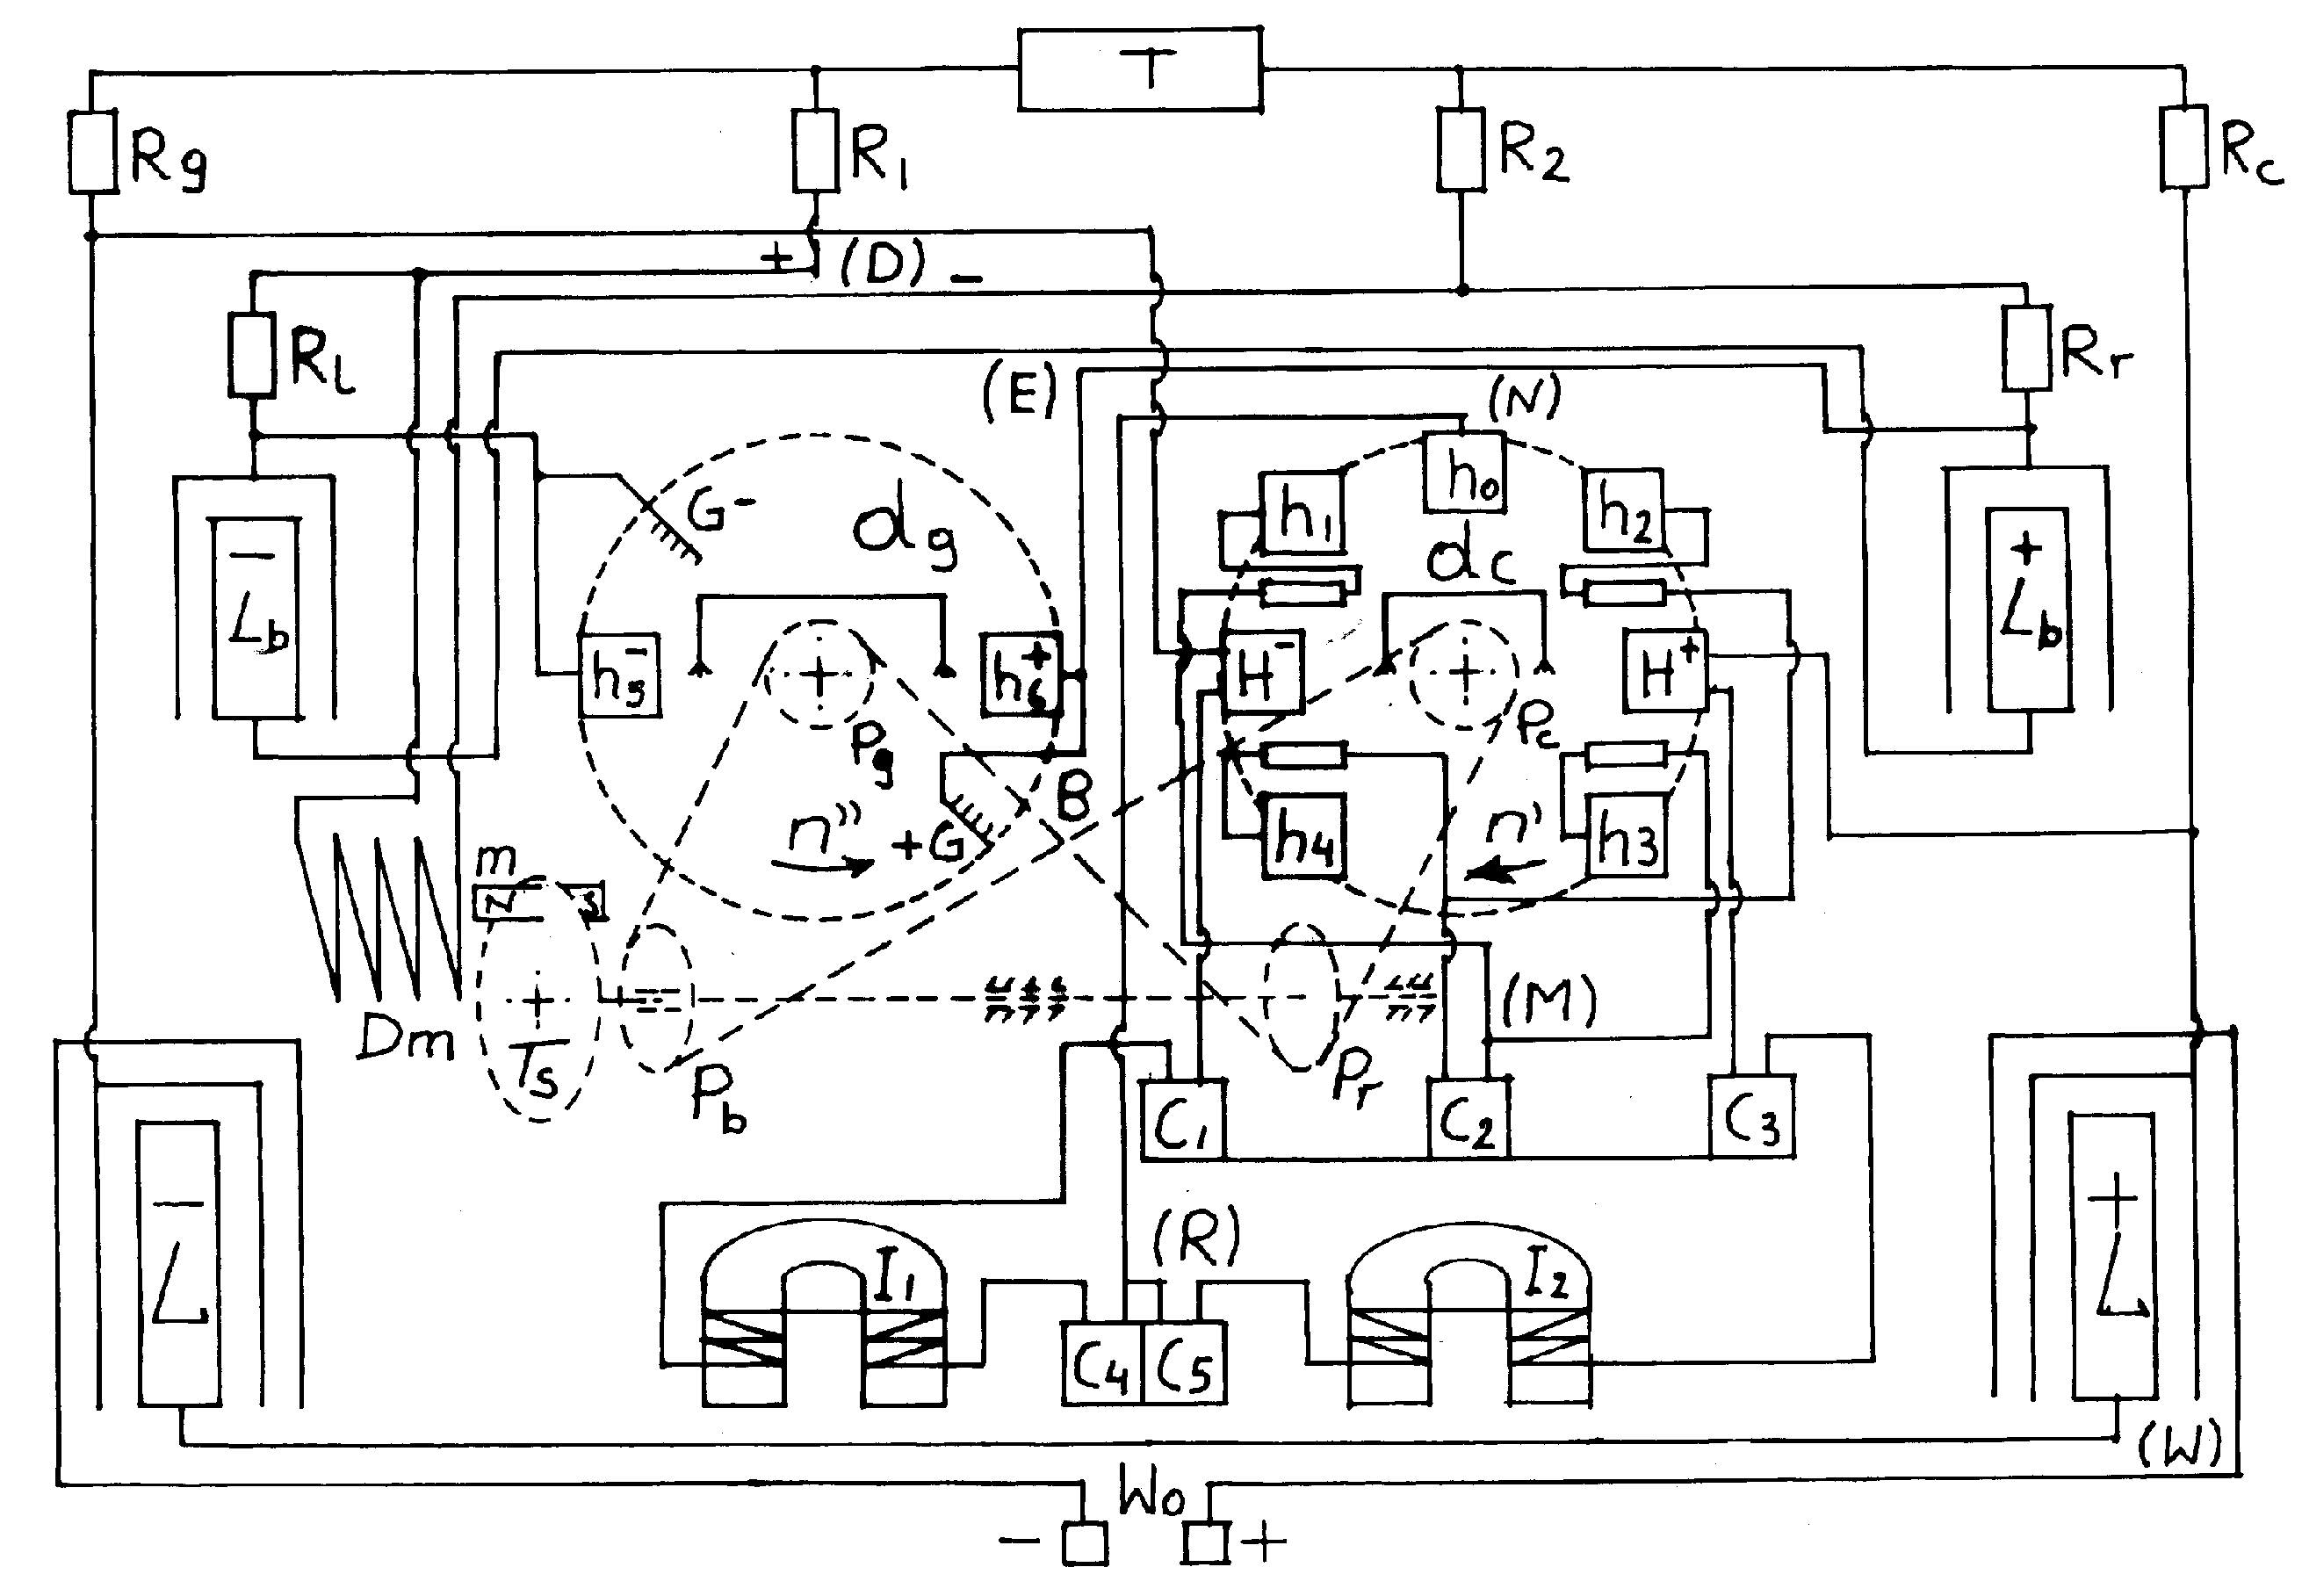 Fig. #D3: Electrical wiring of the influenzmaschine (Fig. LA6 from [1/5]).